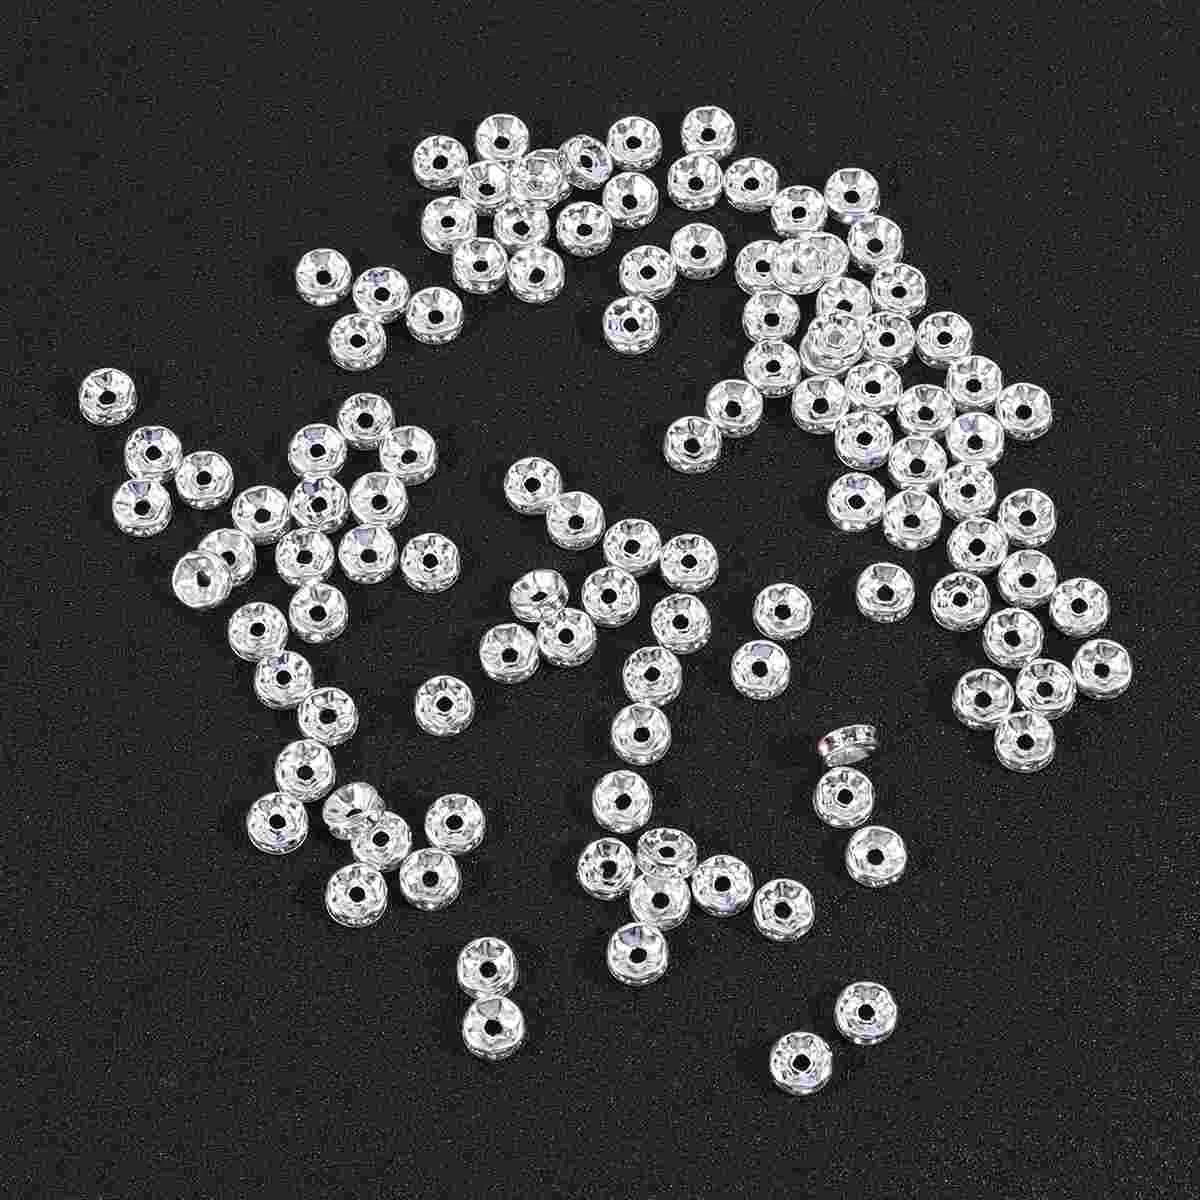 

100pcs Rhinestone Rondelle Spacer Bead Plated 8mm Beads Findings for Jewelery Making DIY Craft (Silver)